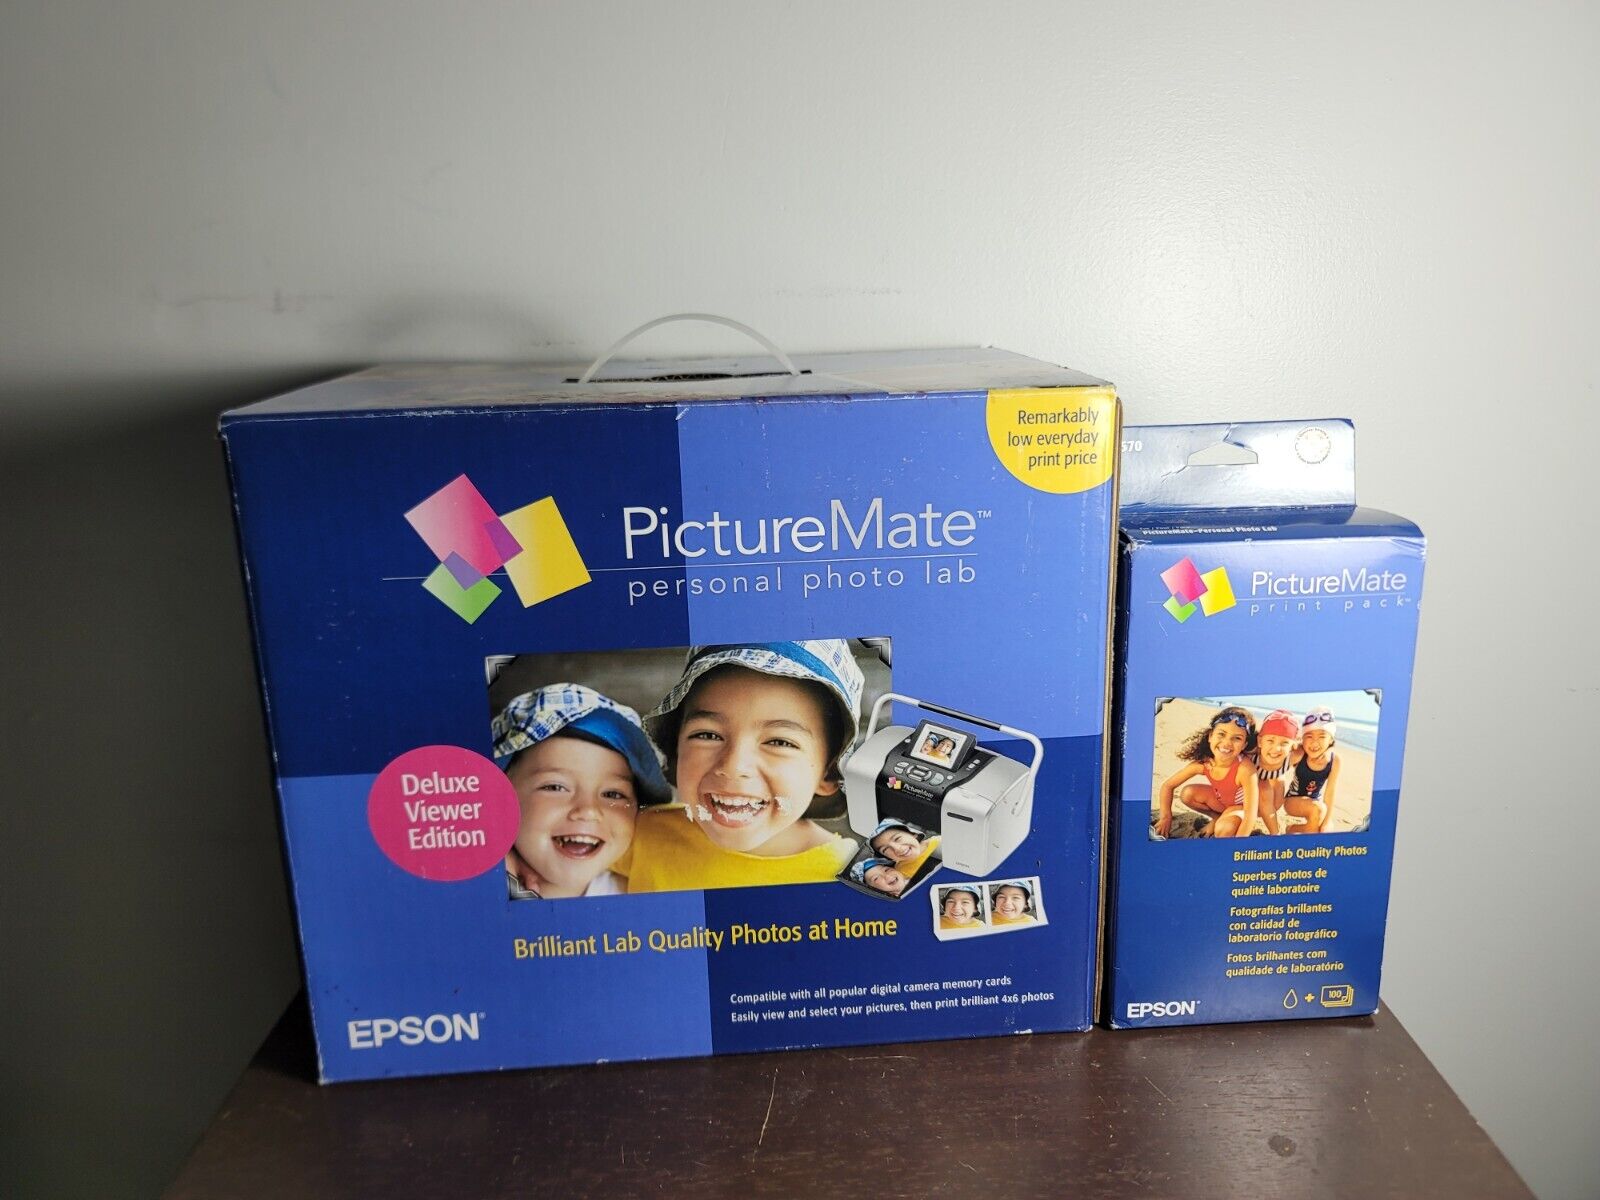 NEW Epson PictureMate Personal Photo Lab Printer Deluxe W/ Pack of Pictures